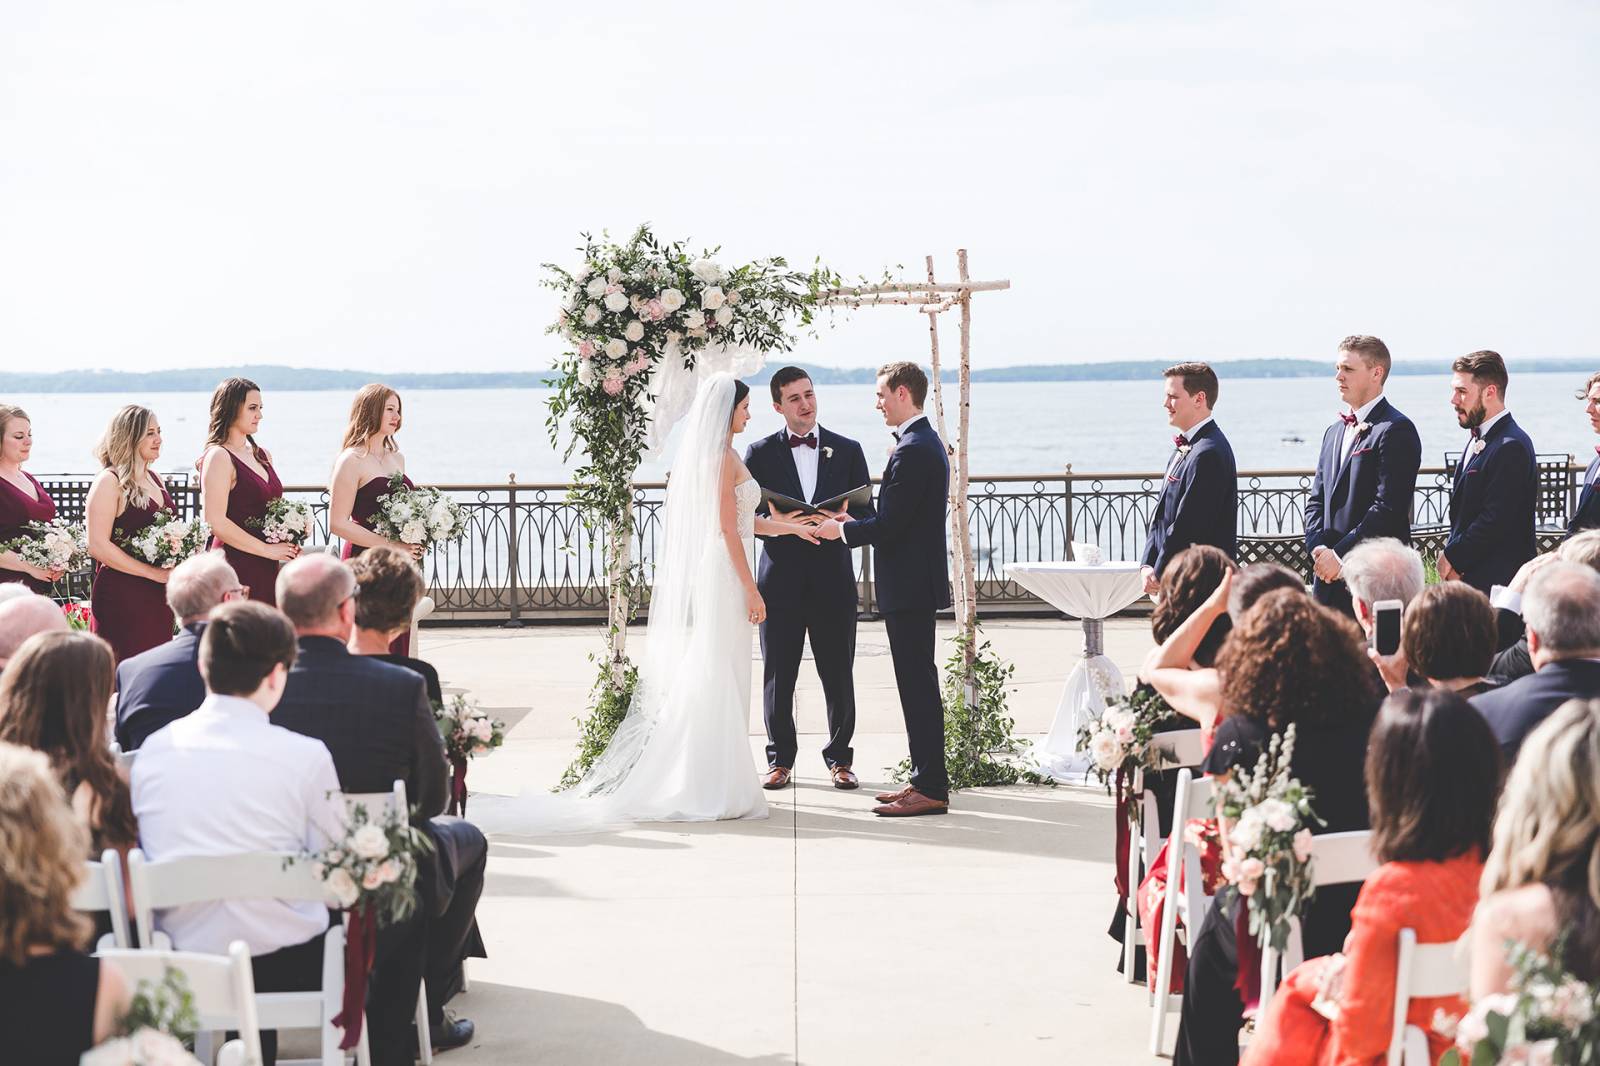 outdoor ceremony marriage license officiant tips